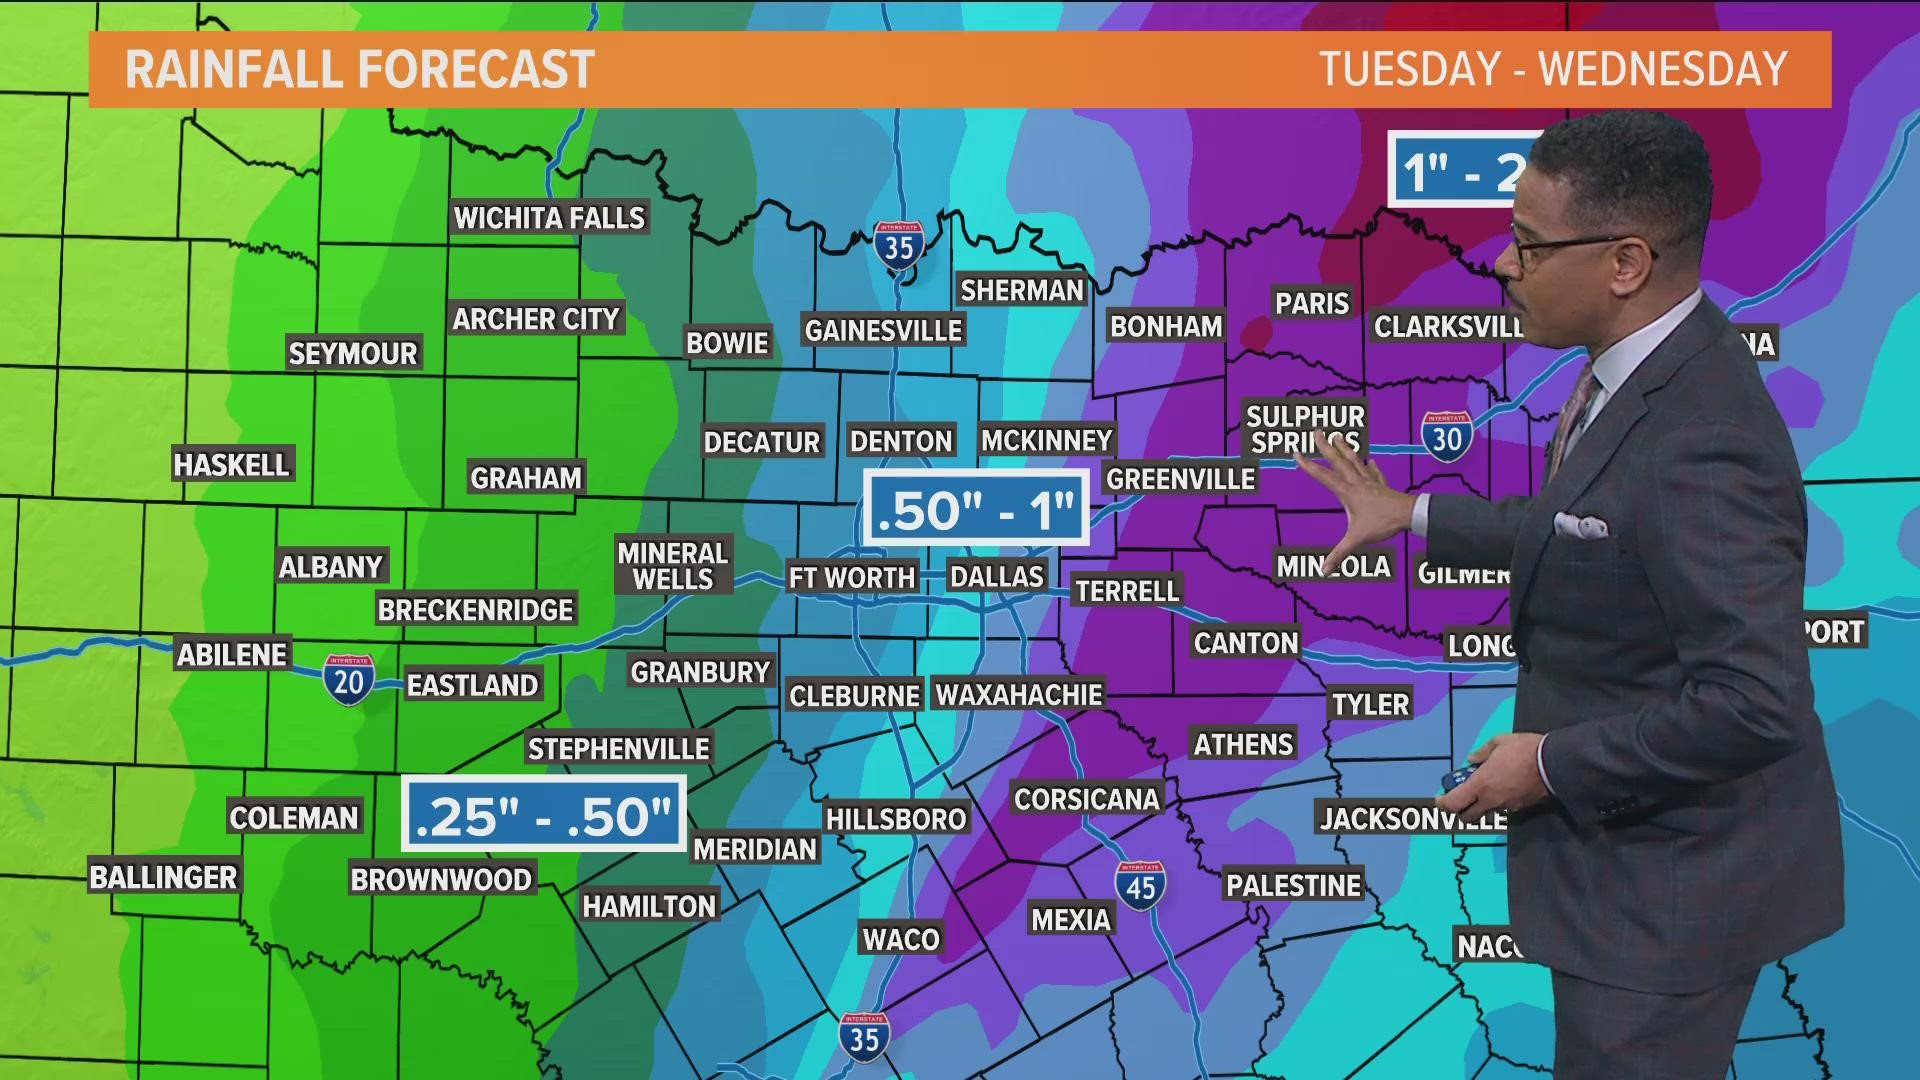 Get ready for a round of rainfall Tuesday and Wednesday.